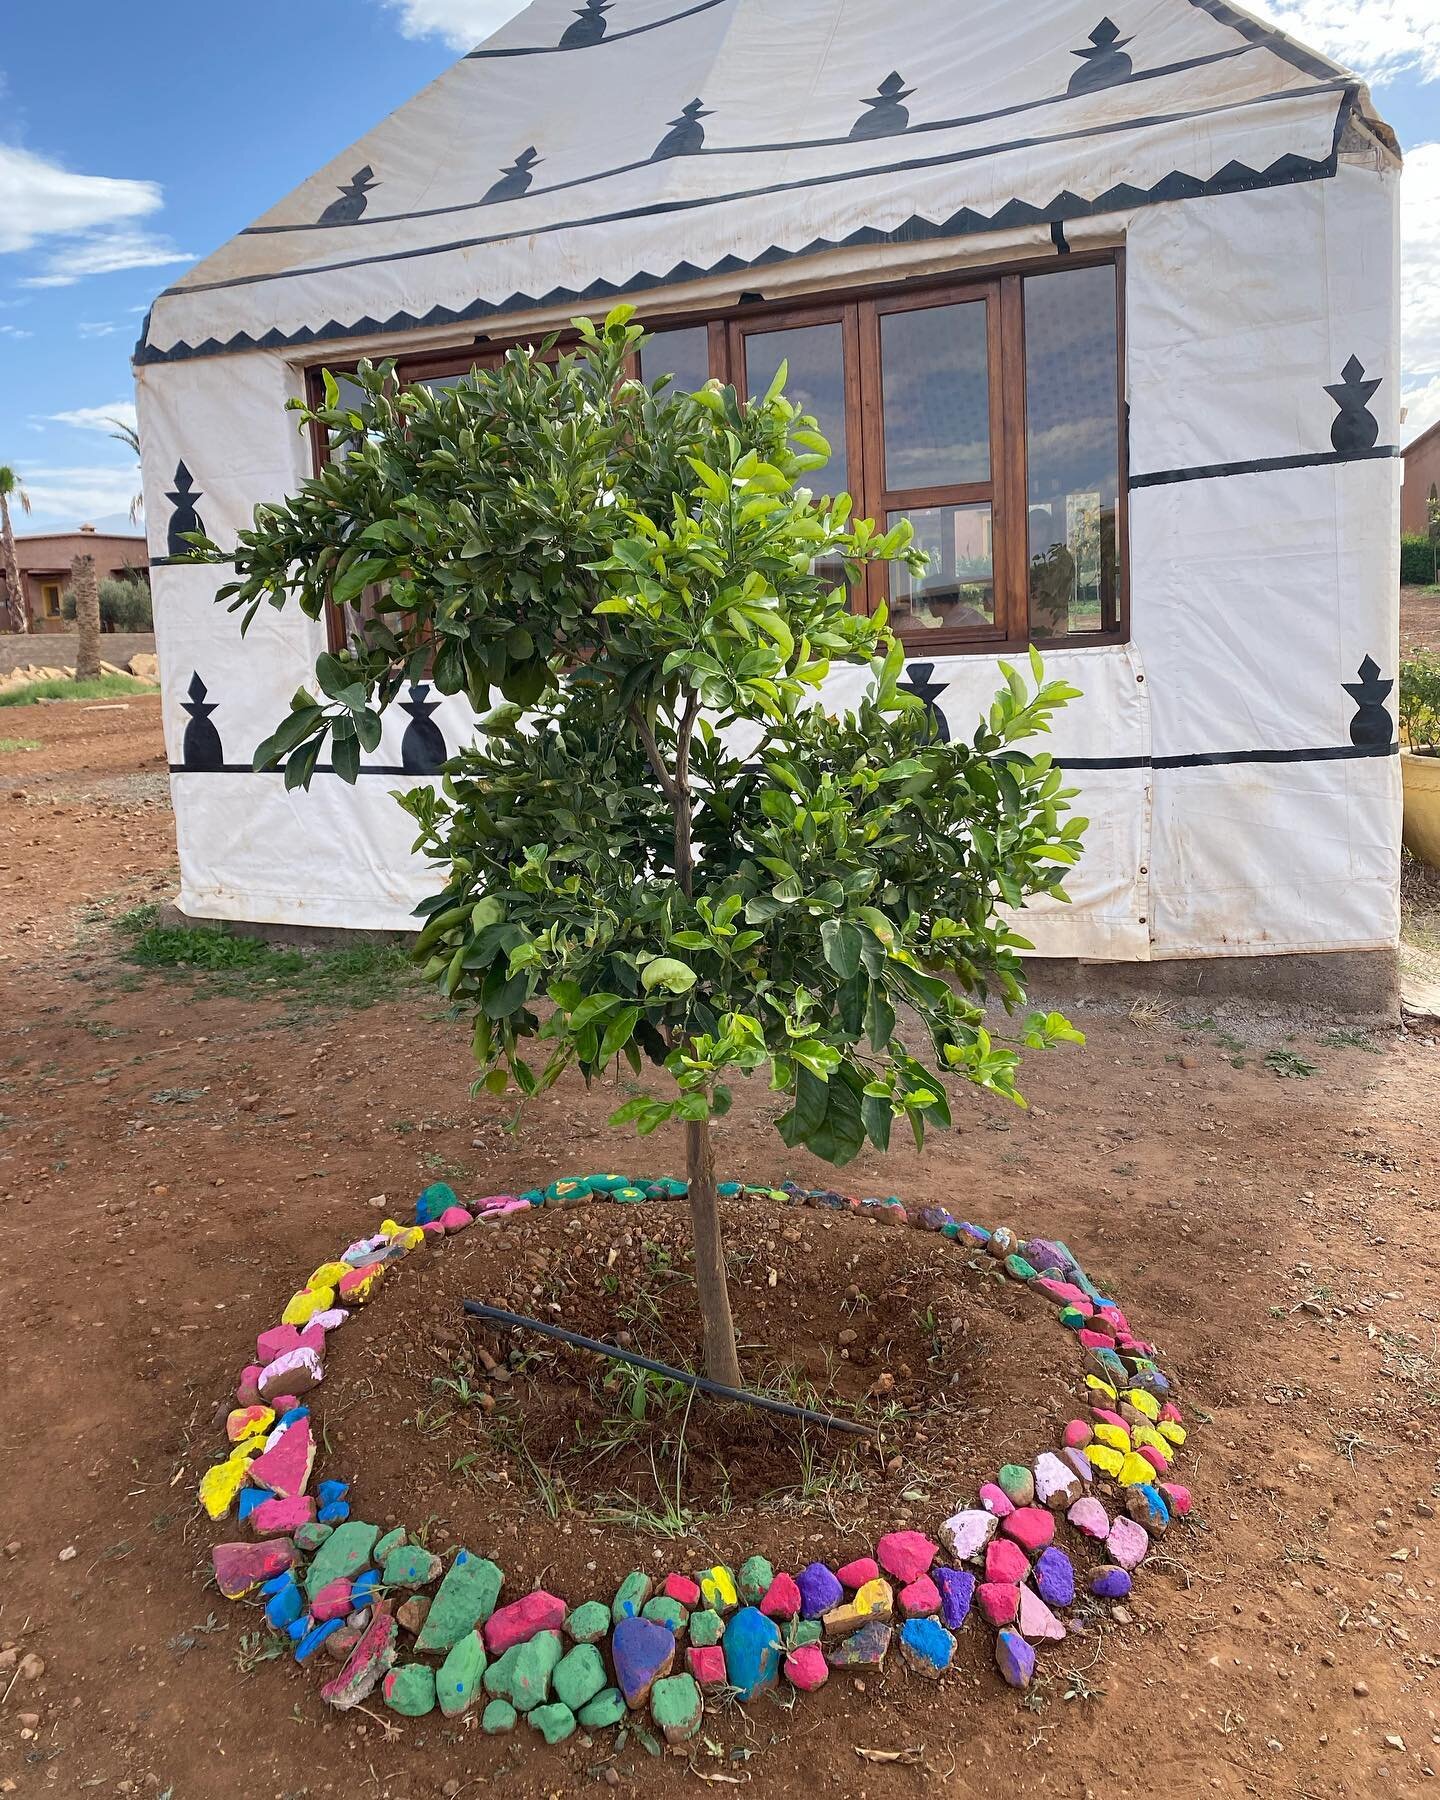 Gift a tree in honor of someone you love. Planted this little beauty in honor of my dad on Thanksgiving 💗#afak #makeadifference #giveback #dogood #feelgood #love #kindness #compassion #whatmattersmost